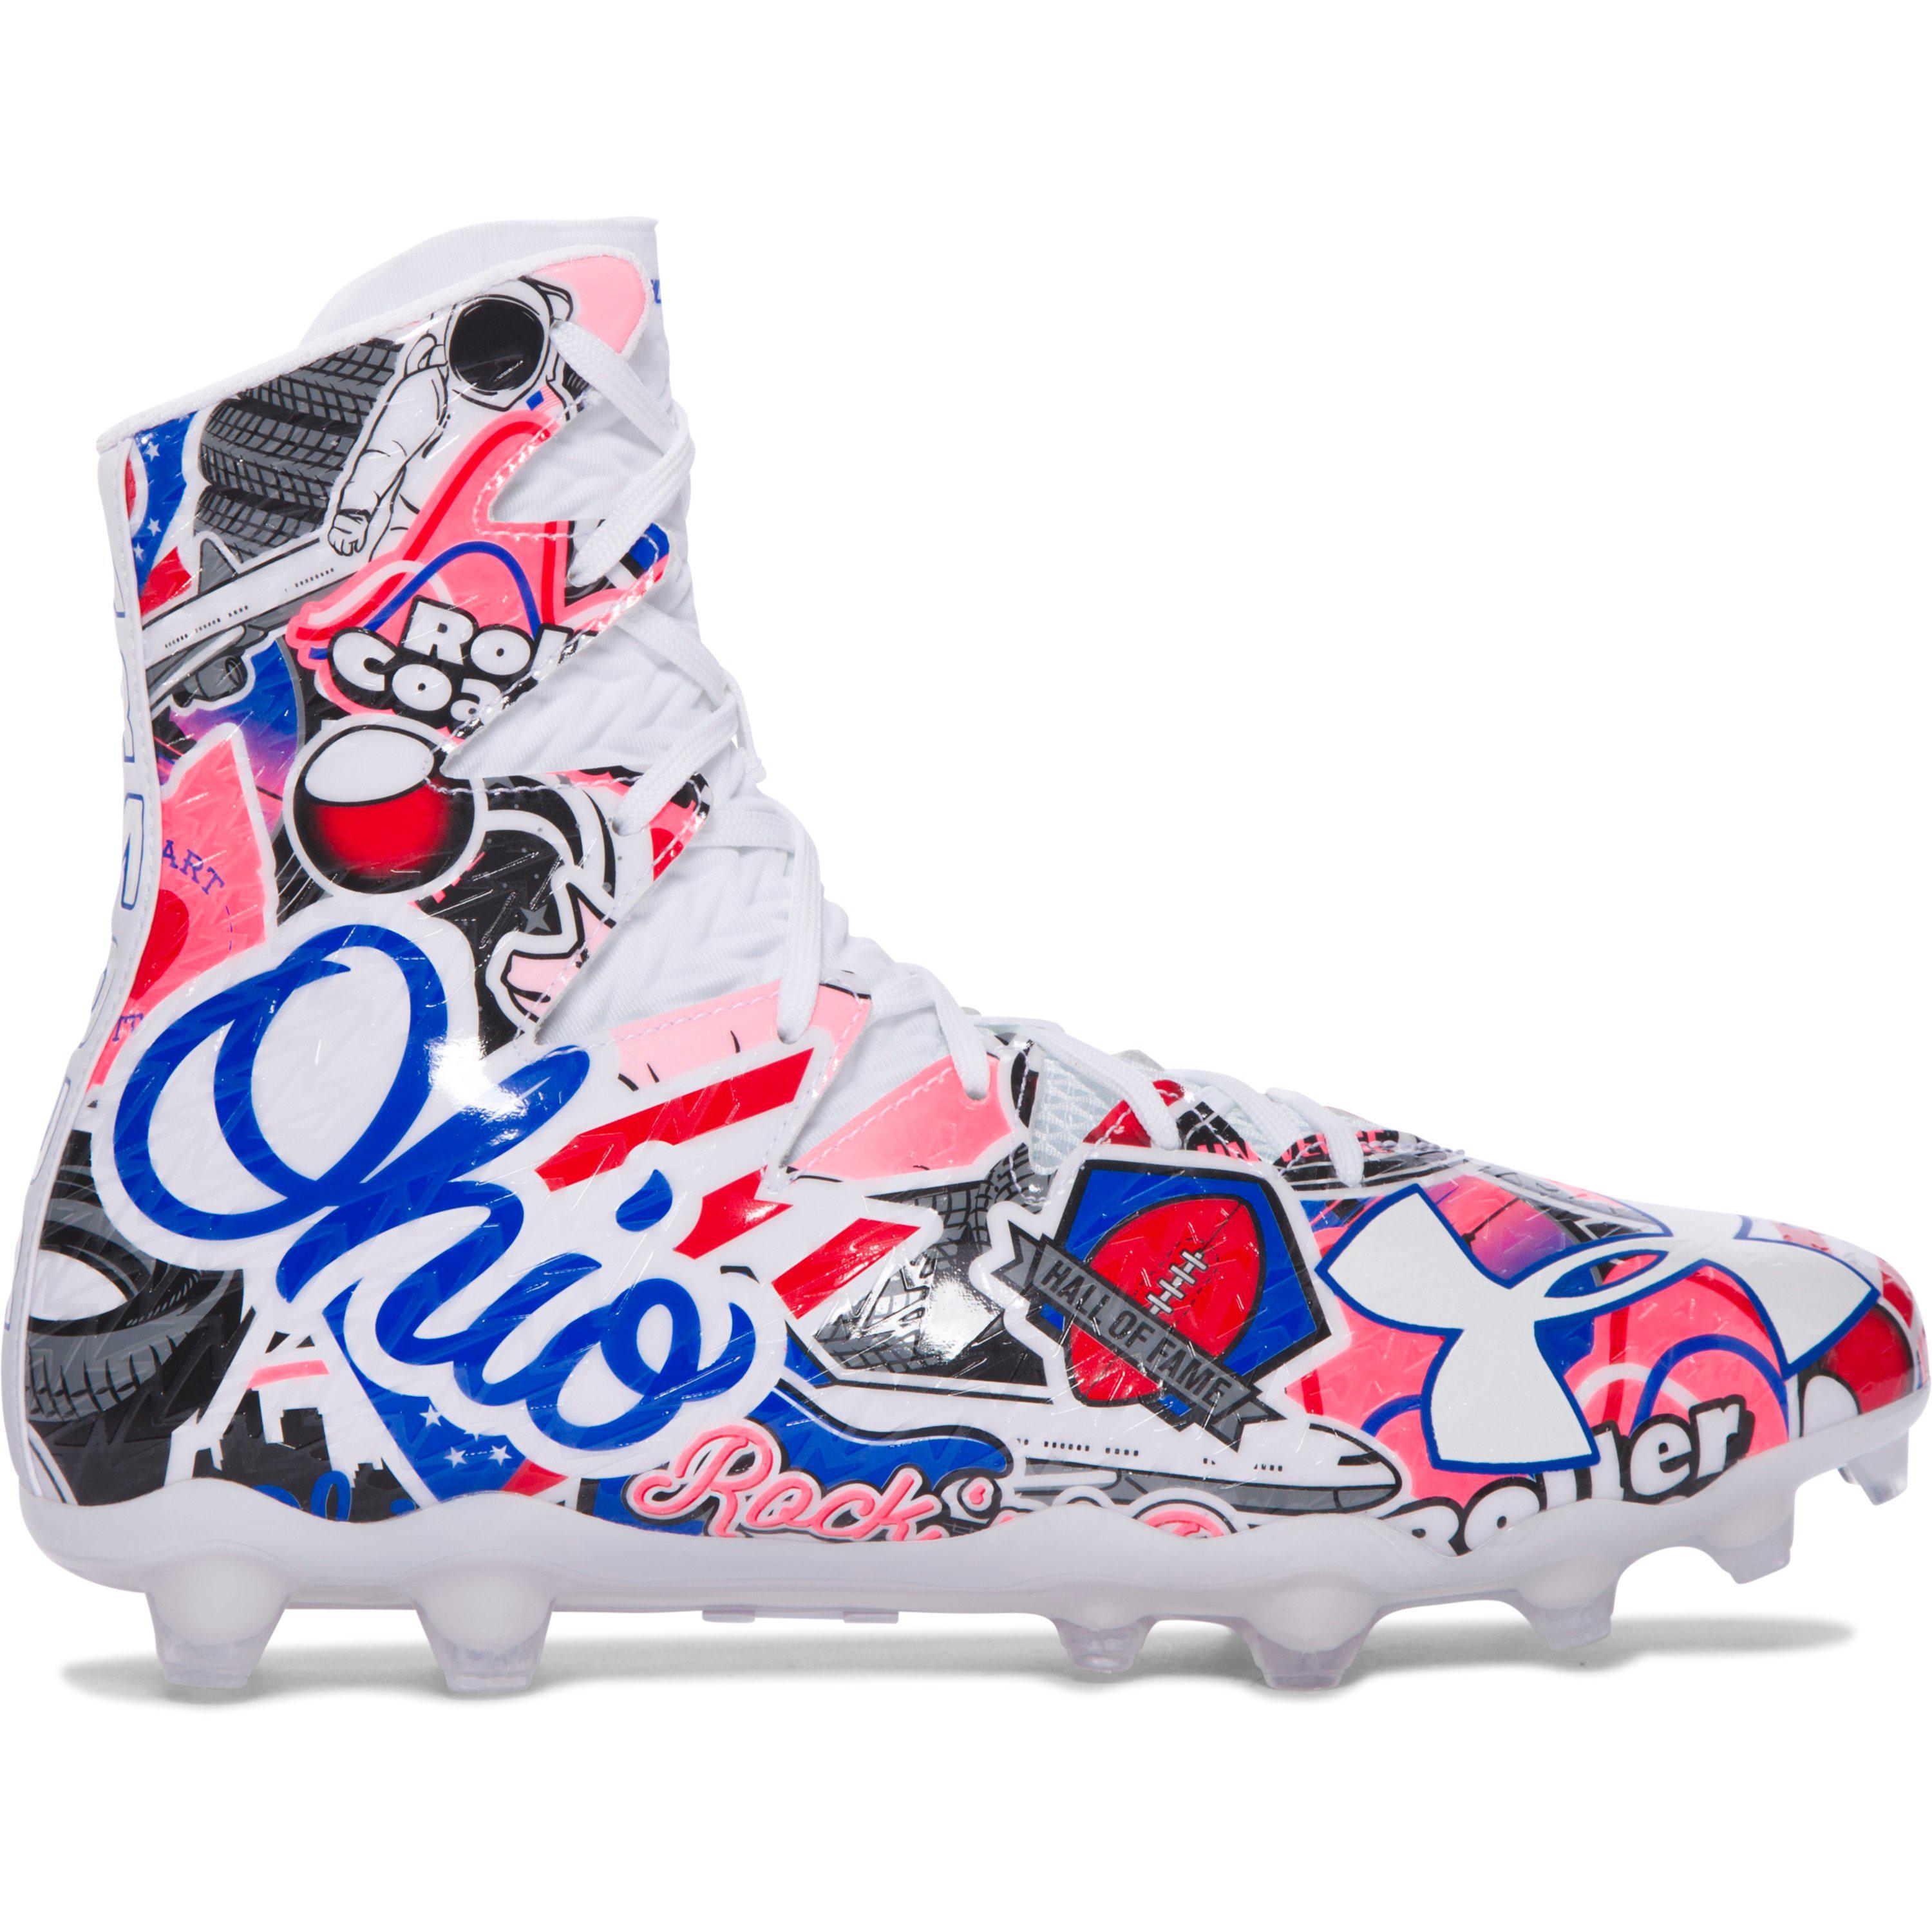 under armour limited edition football cleats